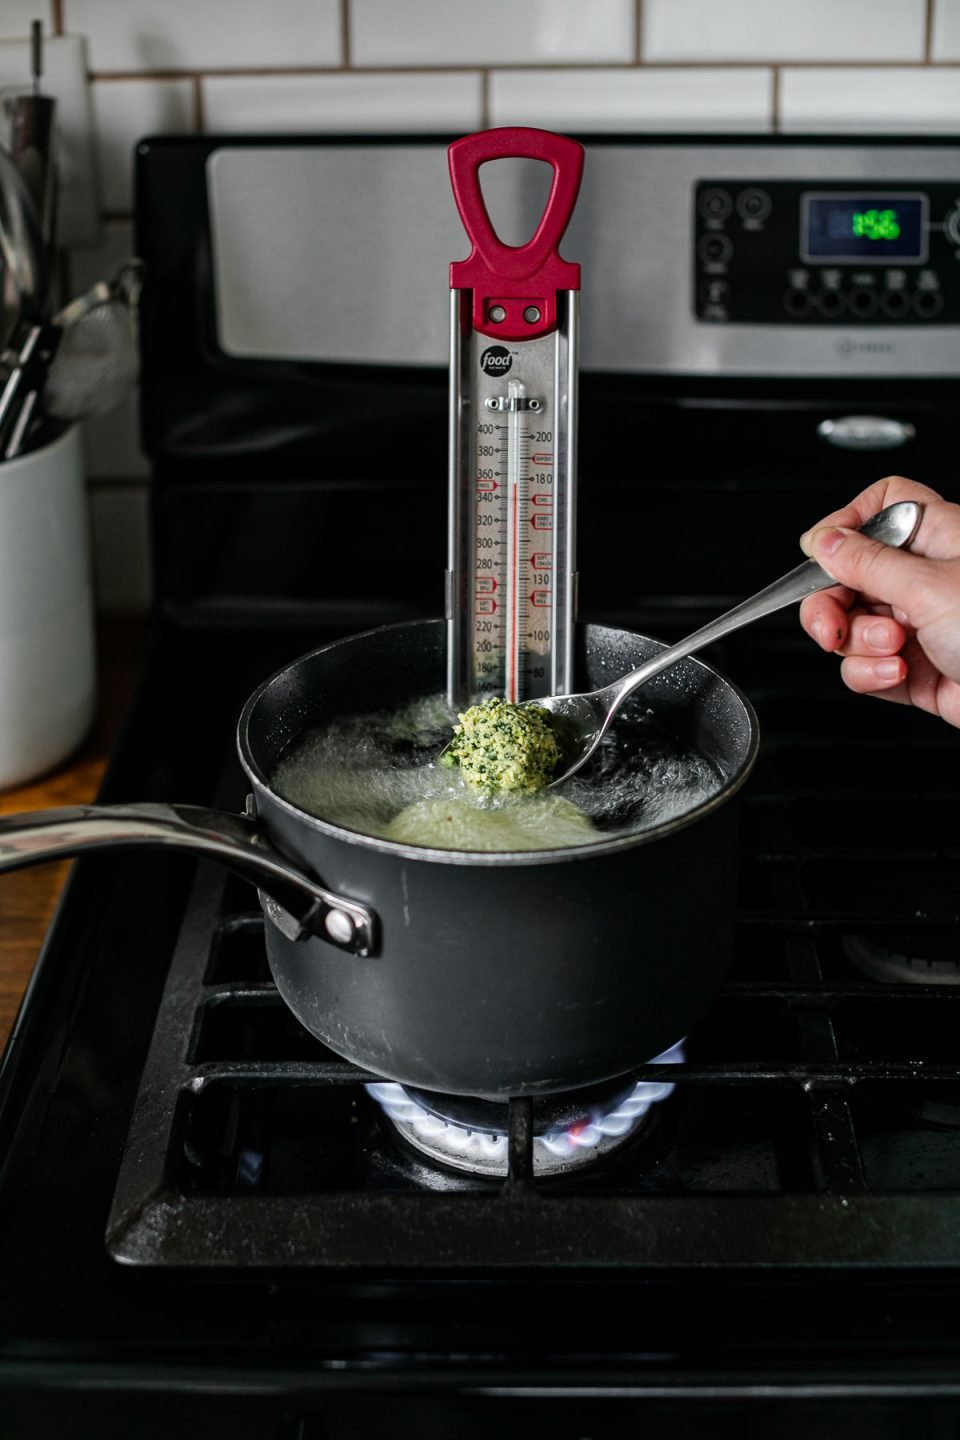 A woman's hand holds a silver spoon with a single uncooked herb green falafel ball resting atop uses the spoon to lower the falafel ball into a black sauce pan filled with prepared oil for frying. A candy thermometer rests inside of the sauce pan on top of a gas stovetop range.